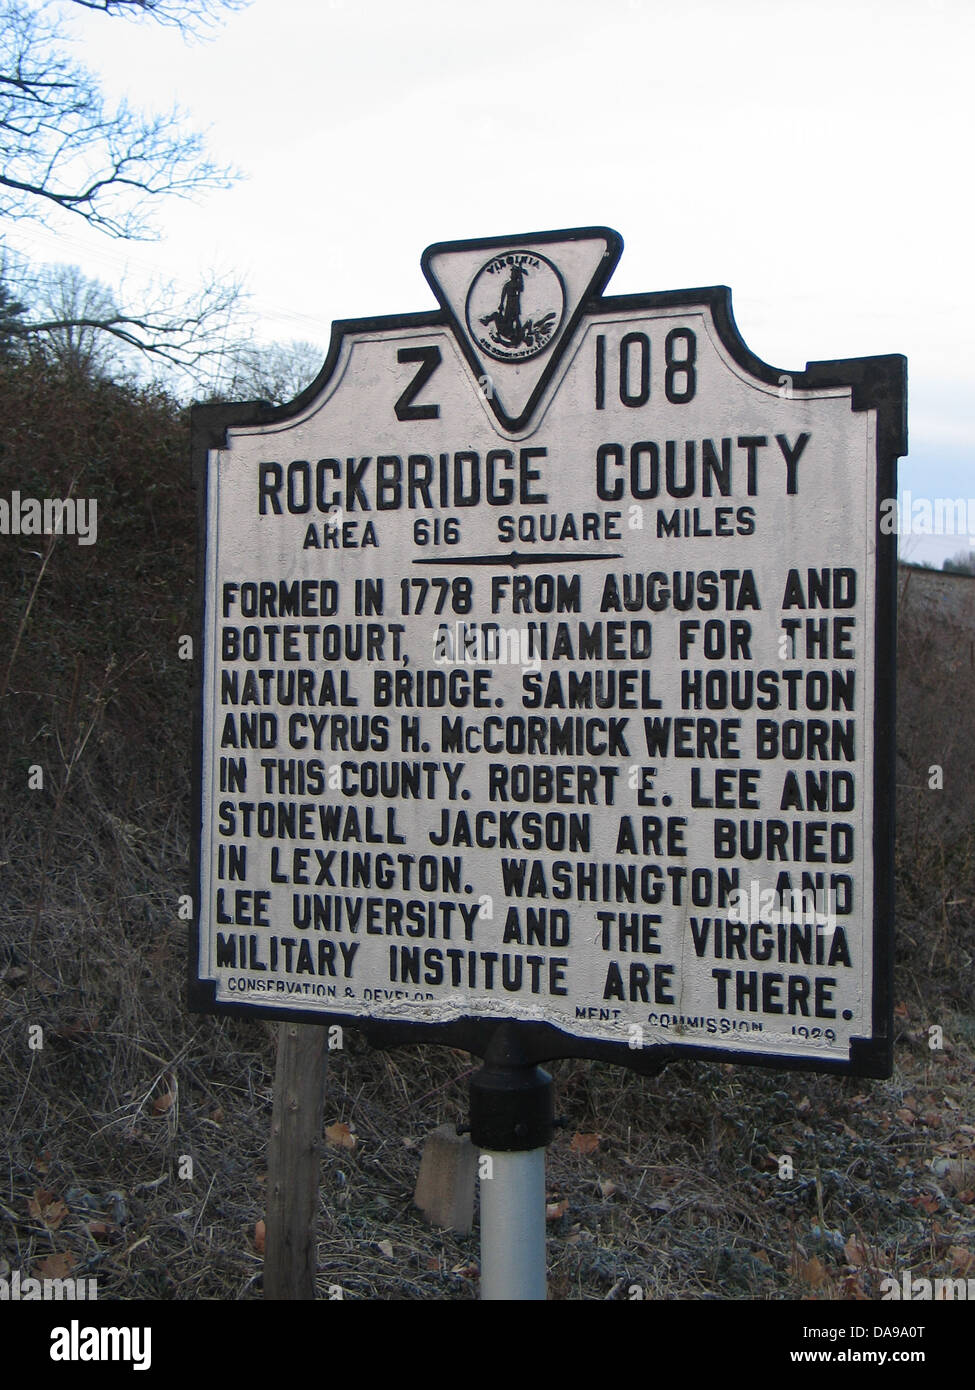 ROCKBRIDGE COUNTY Area 616 Square Miles Formed in 1778 from Augusta and Botetourt, and named for the Natural Bridge. Samuel Houston and Cyrus H. McCormick were born in this county. Robert E. Lee and Stonewall Jackson are buried in Lexington. Washington and Lee University and the Virginia Military Institute are there. Conservation & Development Commission, 1929 Stock Photo